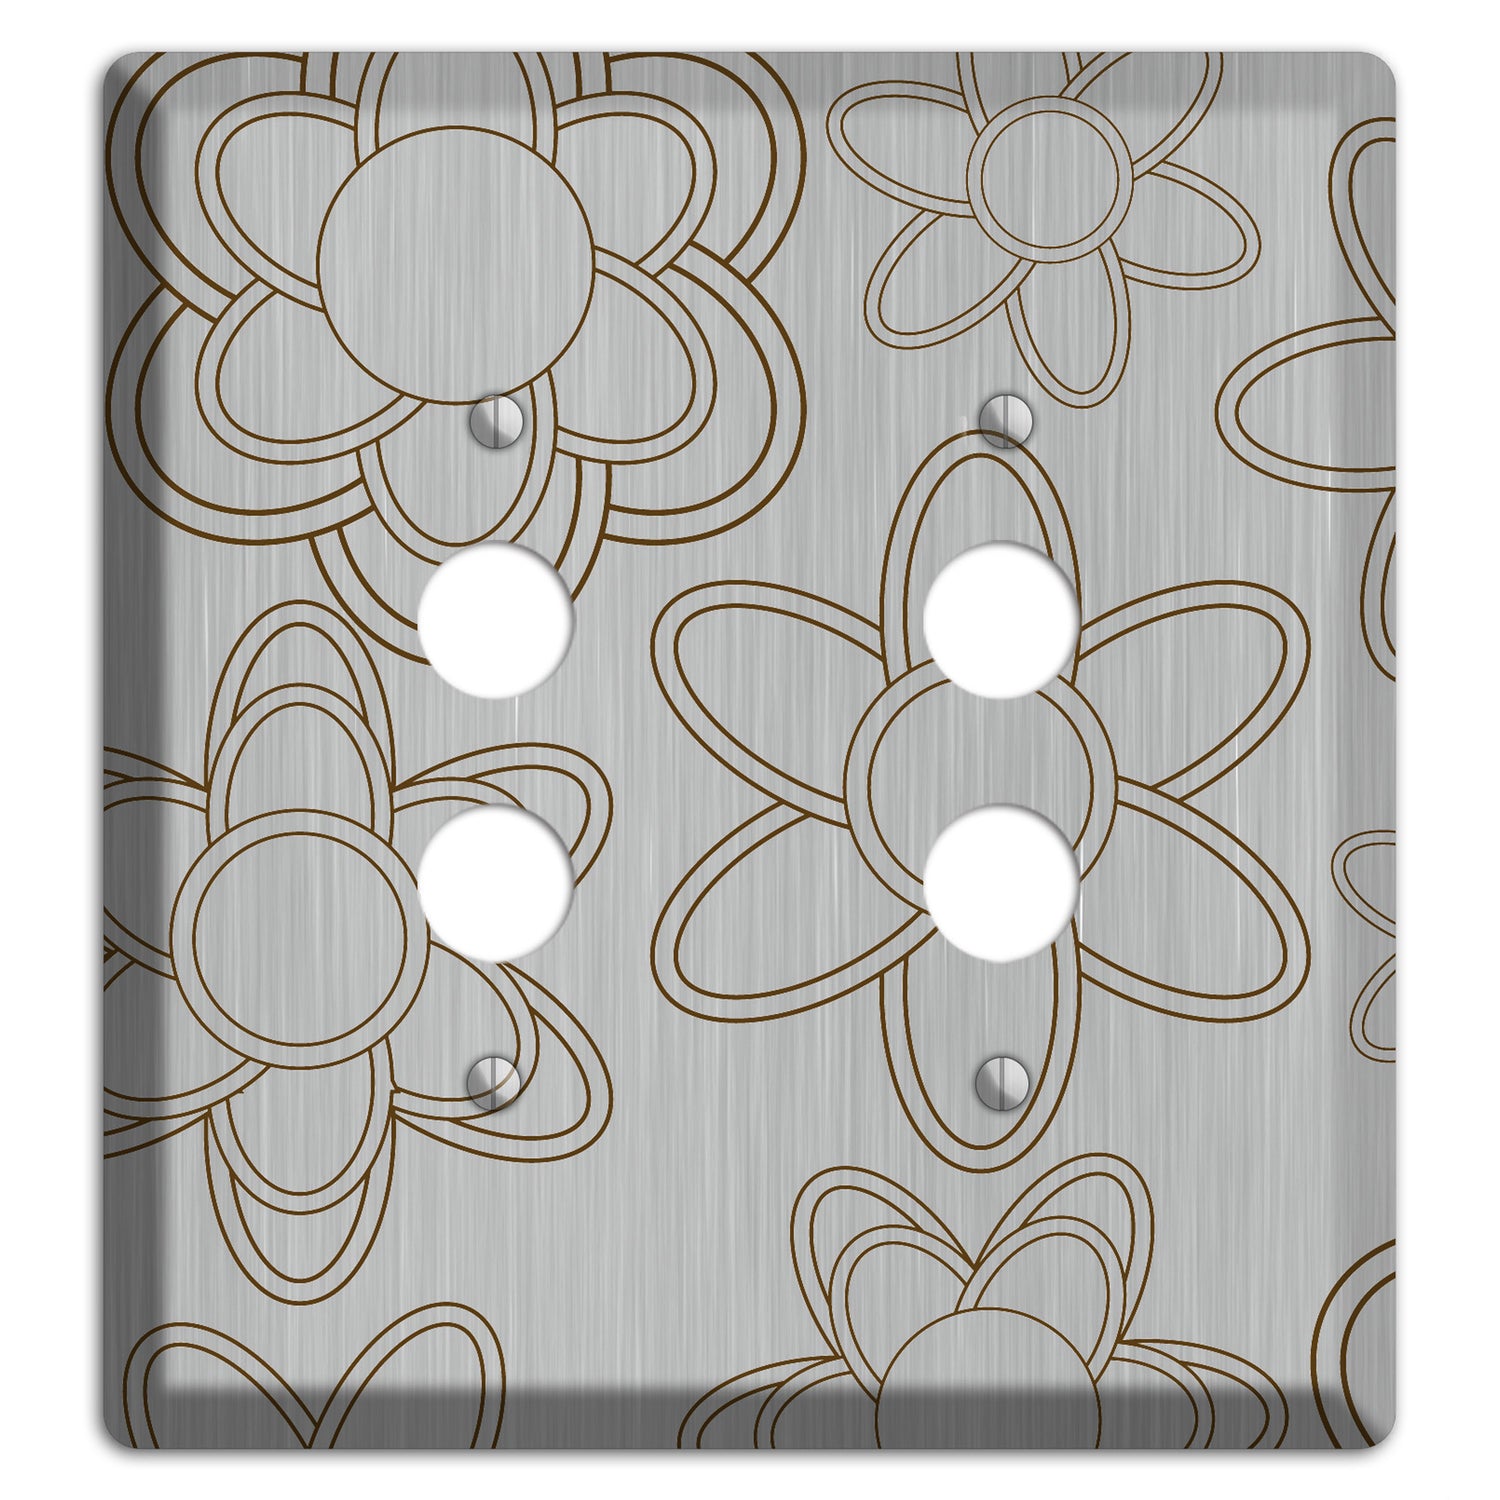 Retro Floral Contour  Stainless 2 Pushbutton Wallplate